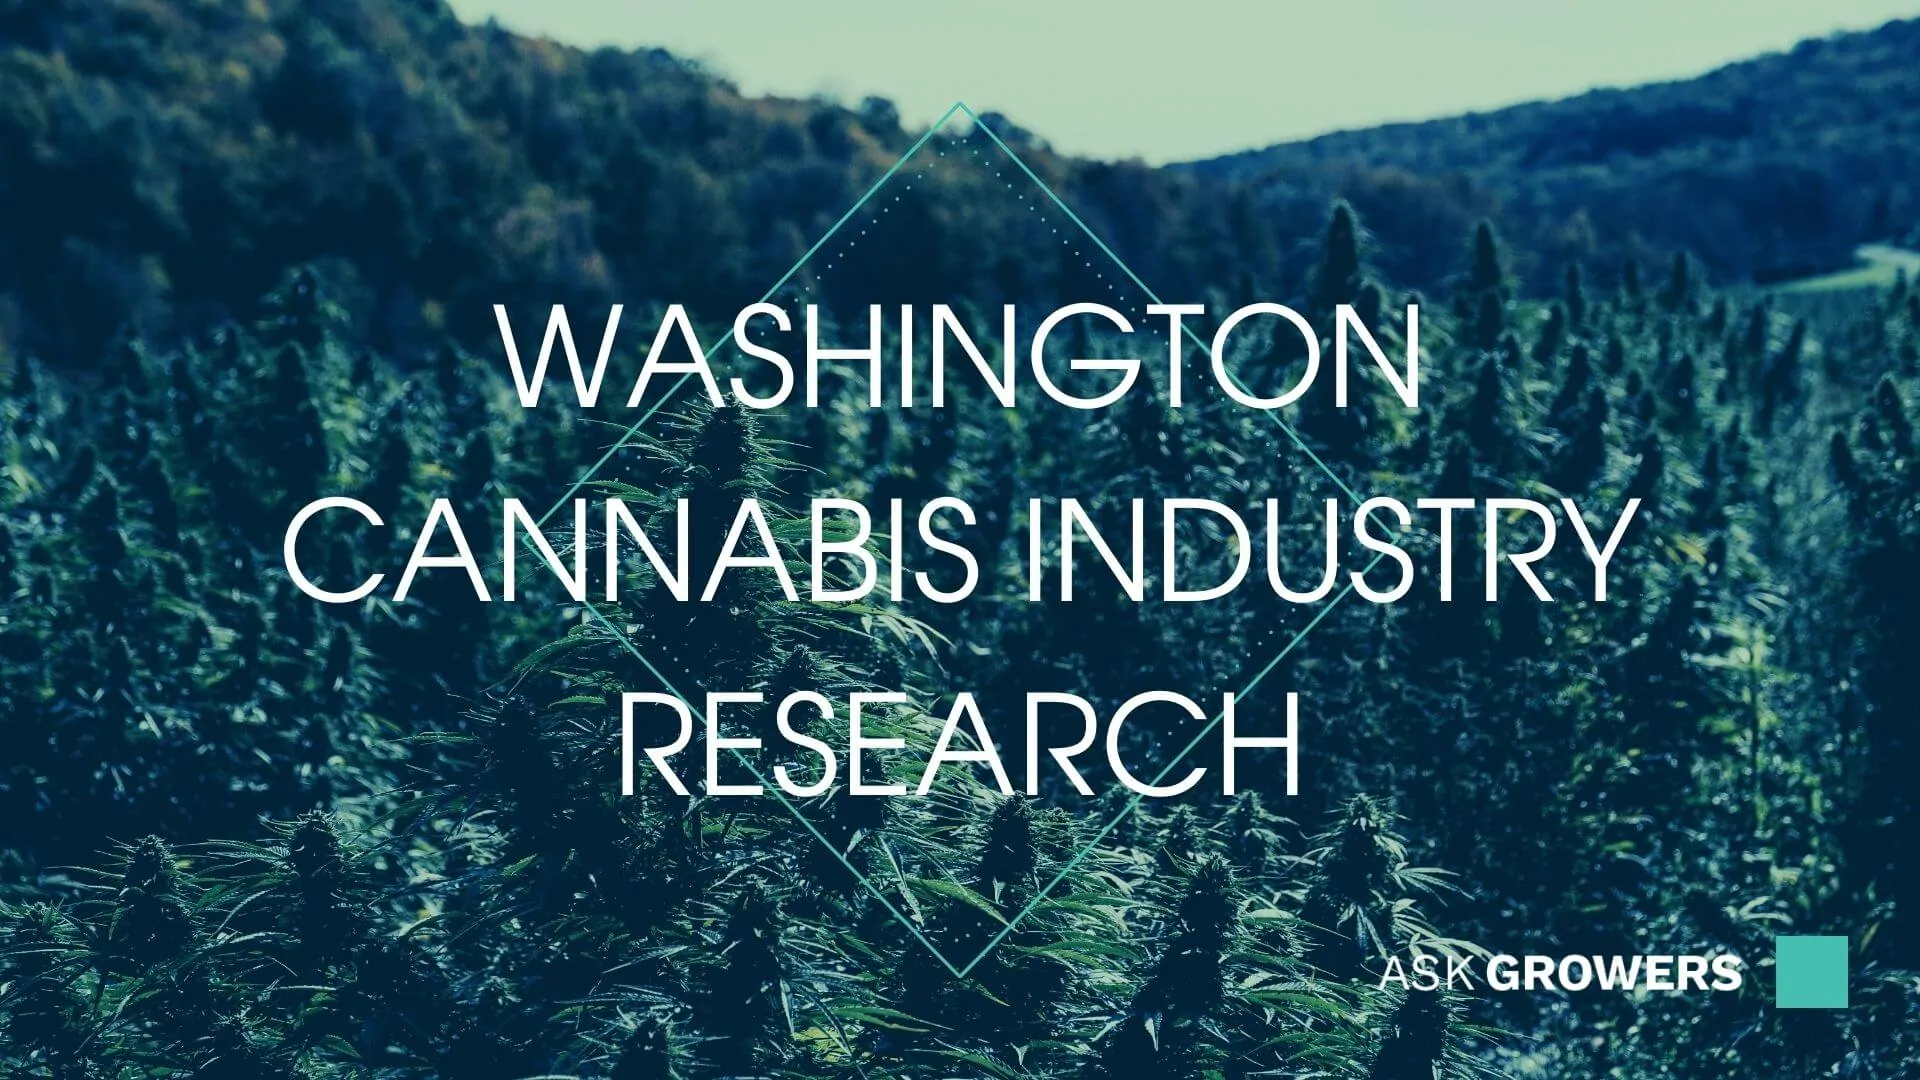 In the Past Five Years Alone, Cannabis-Related Tax Receipts Have Grown by 622% in Washington